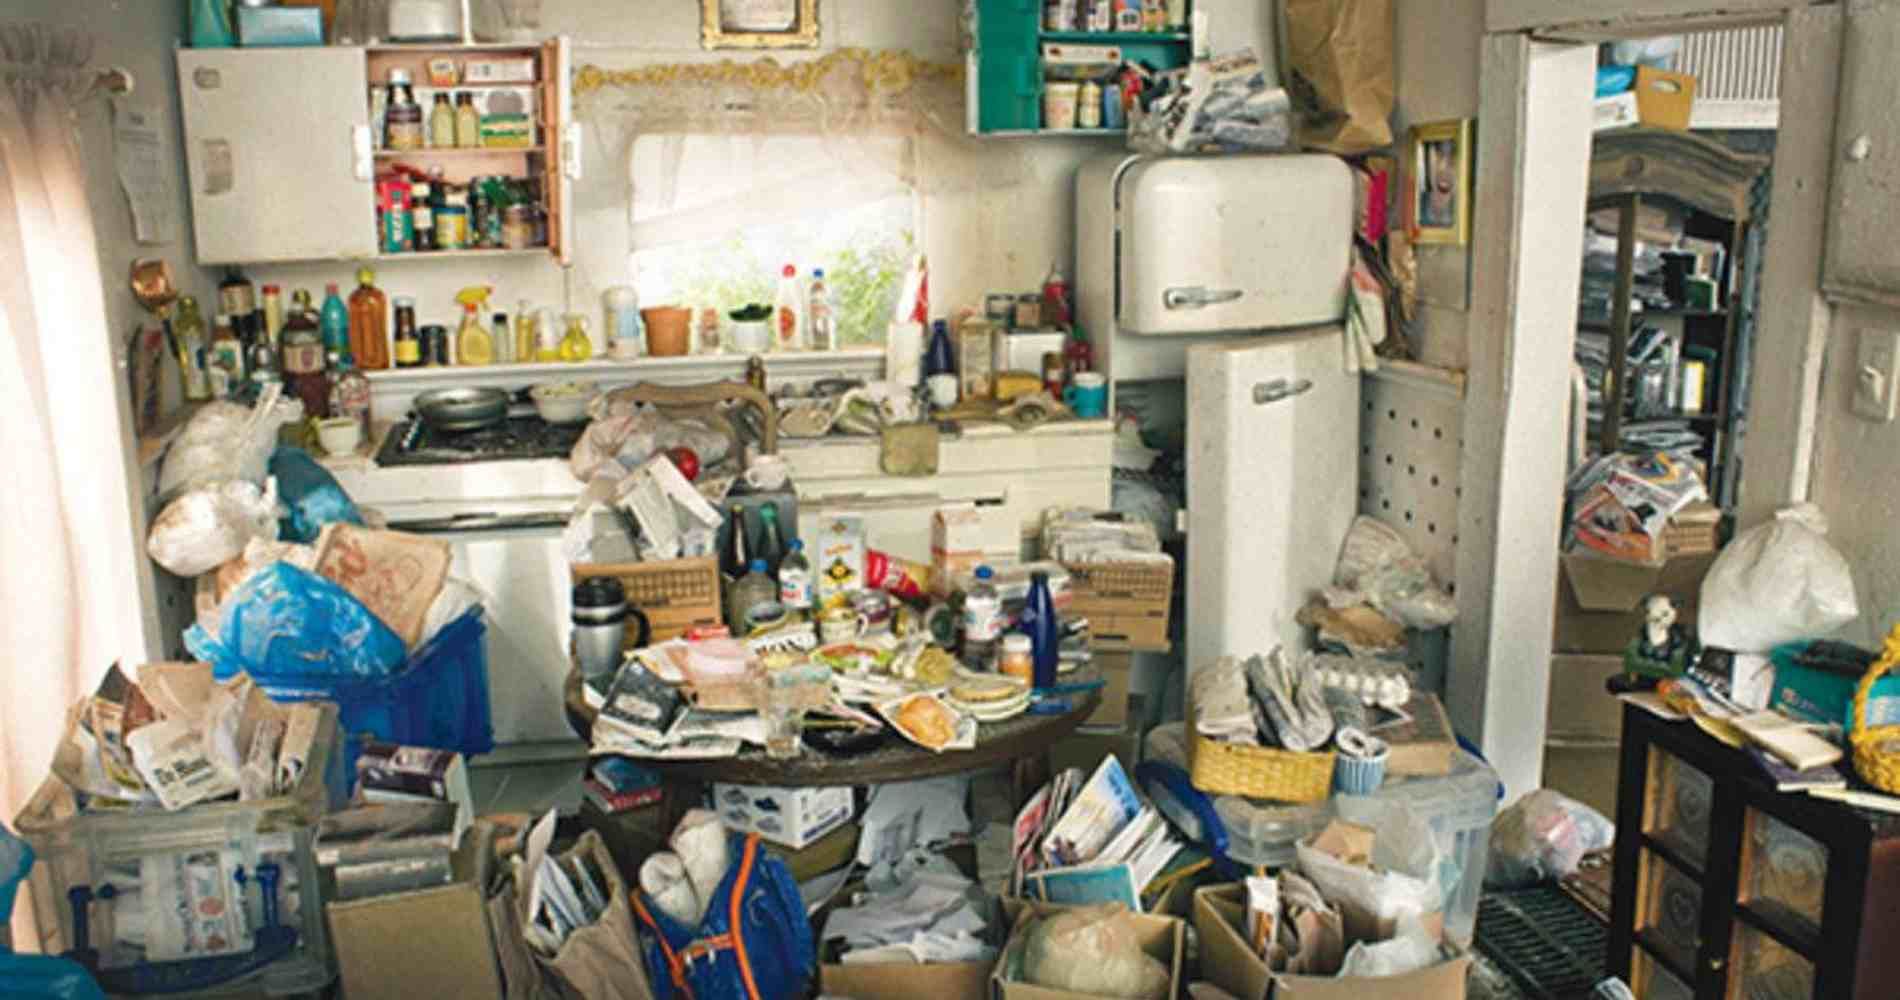 #1 for Hoarding Cleanup in Arcadia, AZ with Over 1200 5-Star Reviews!